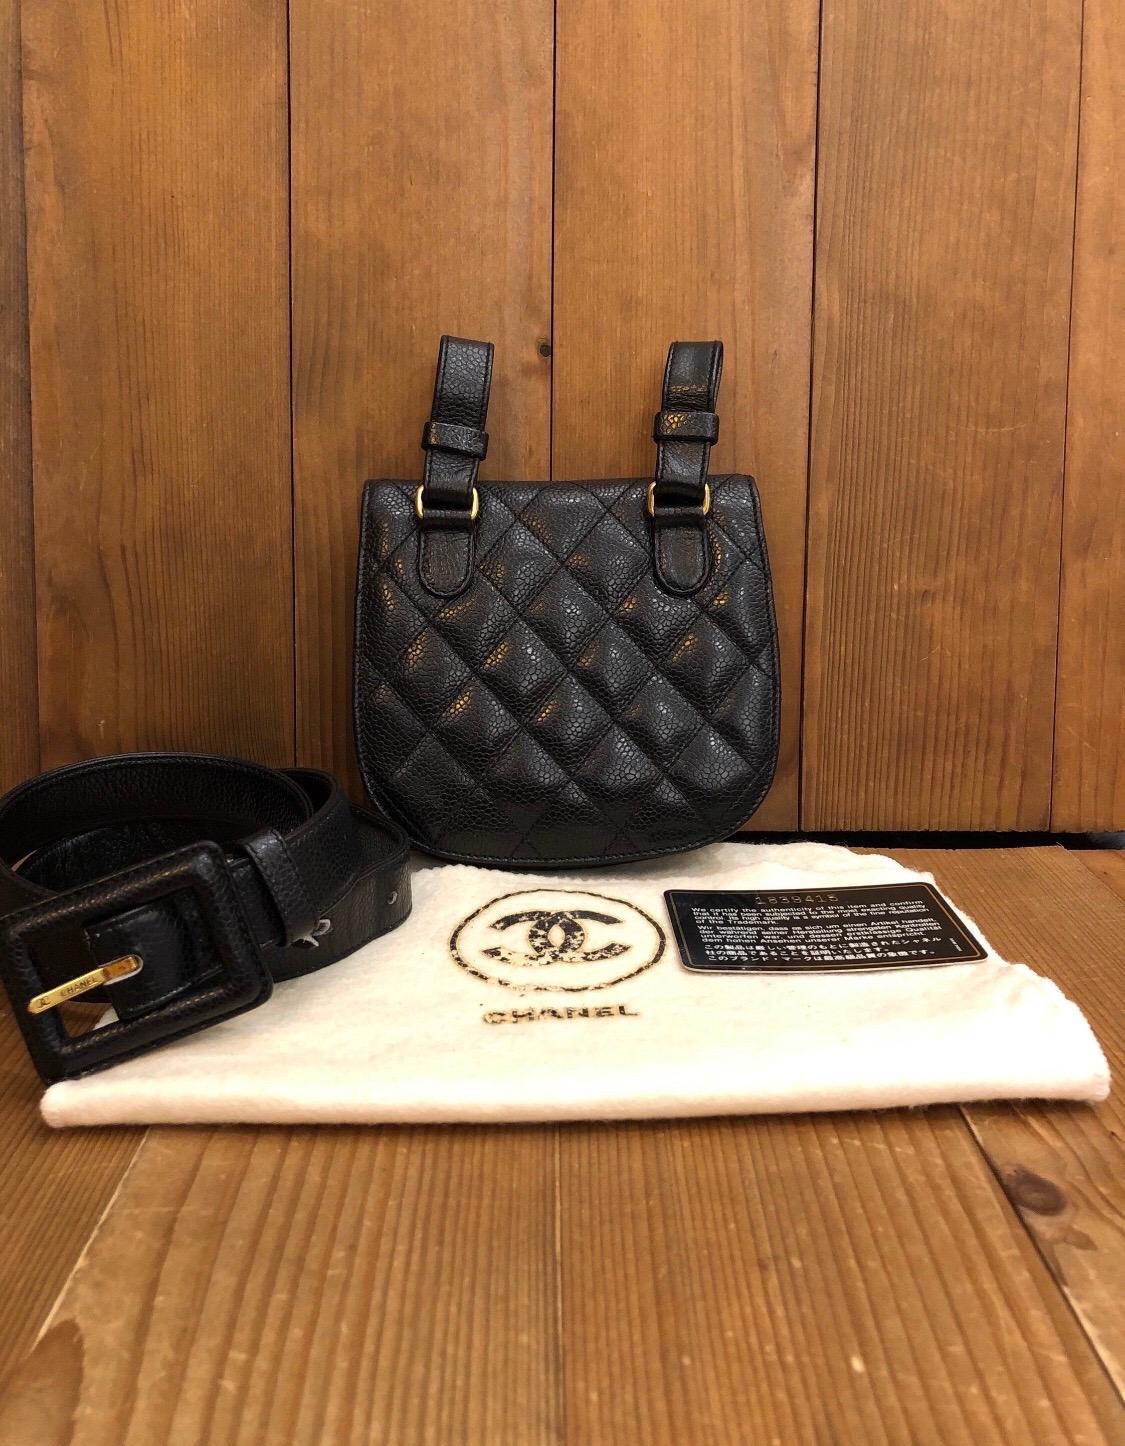 This Chanel belt bag in black caviar leather from year 1991 is in great vintage condition. Belt size 80/32 which fits up to 32 inch waist. Made in France with Holo 1xxxxxx. Comes with dust bag and authenticity card.

Measurements: